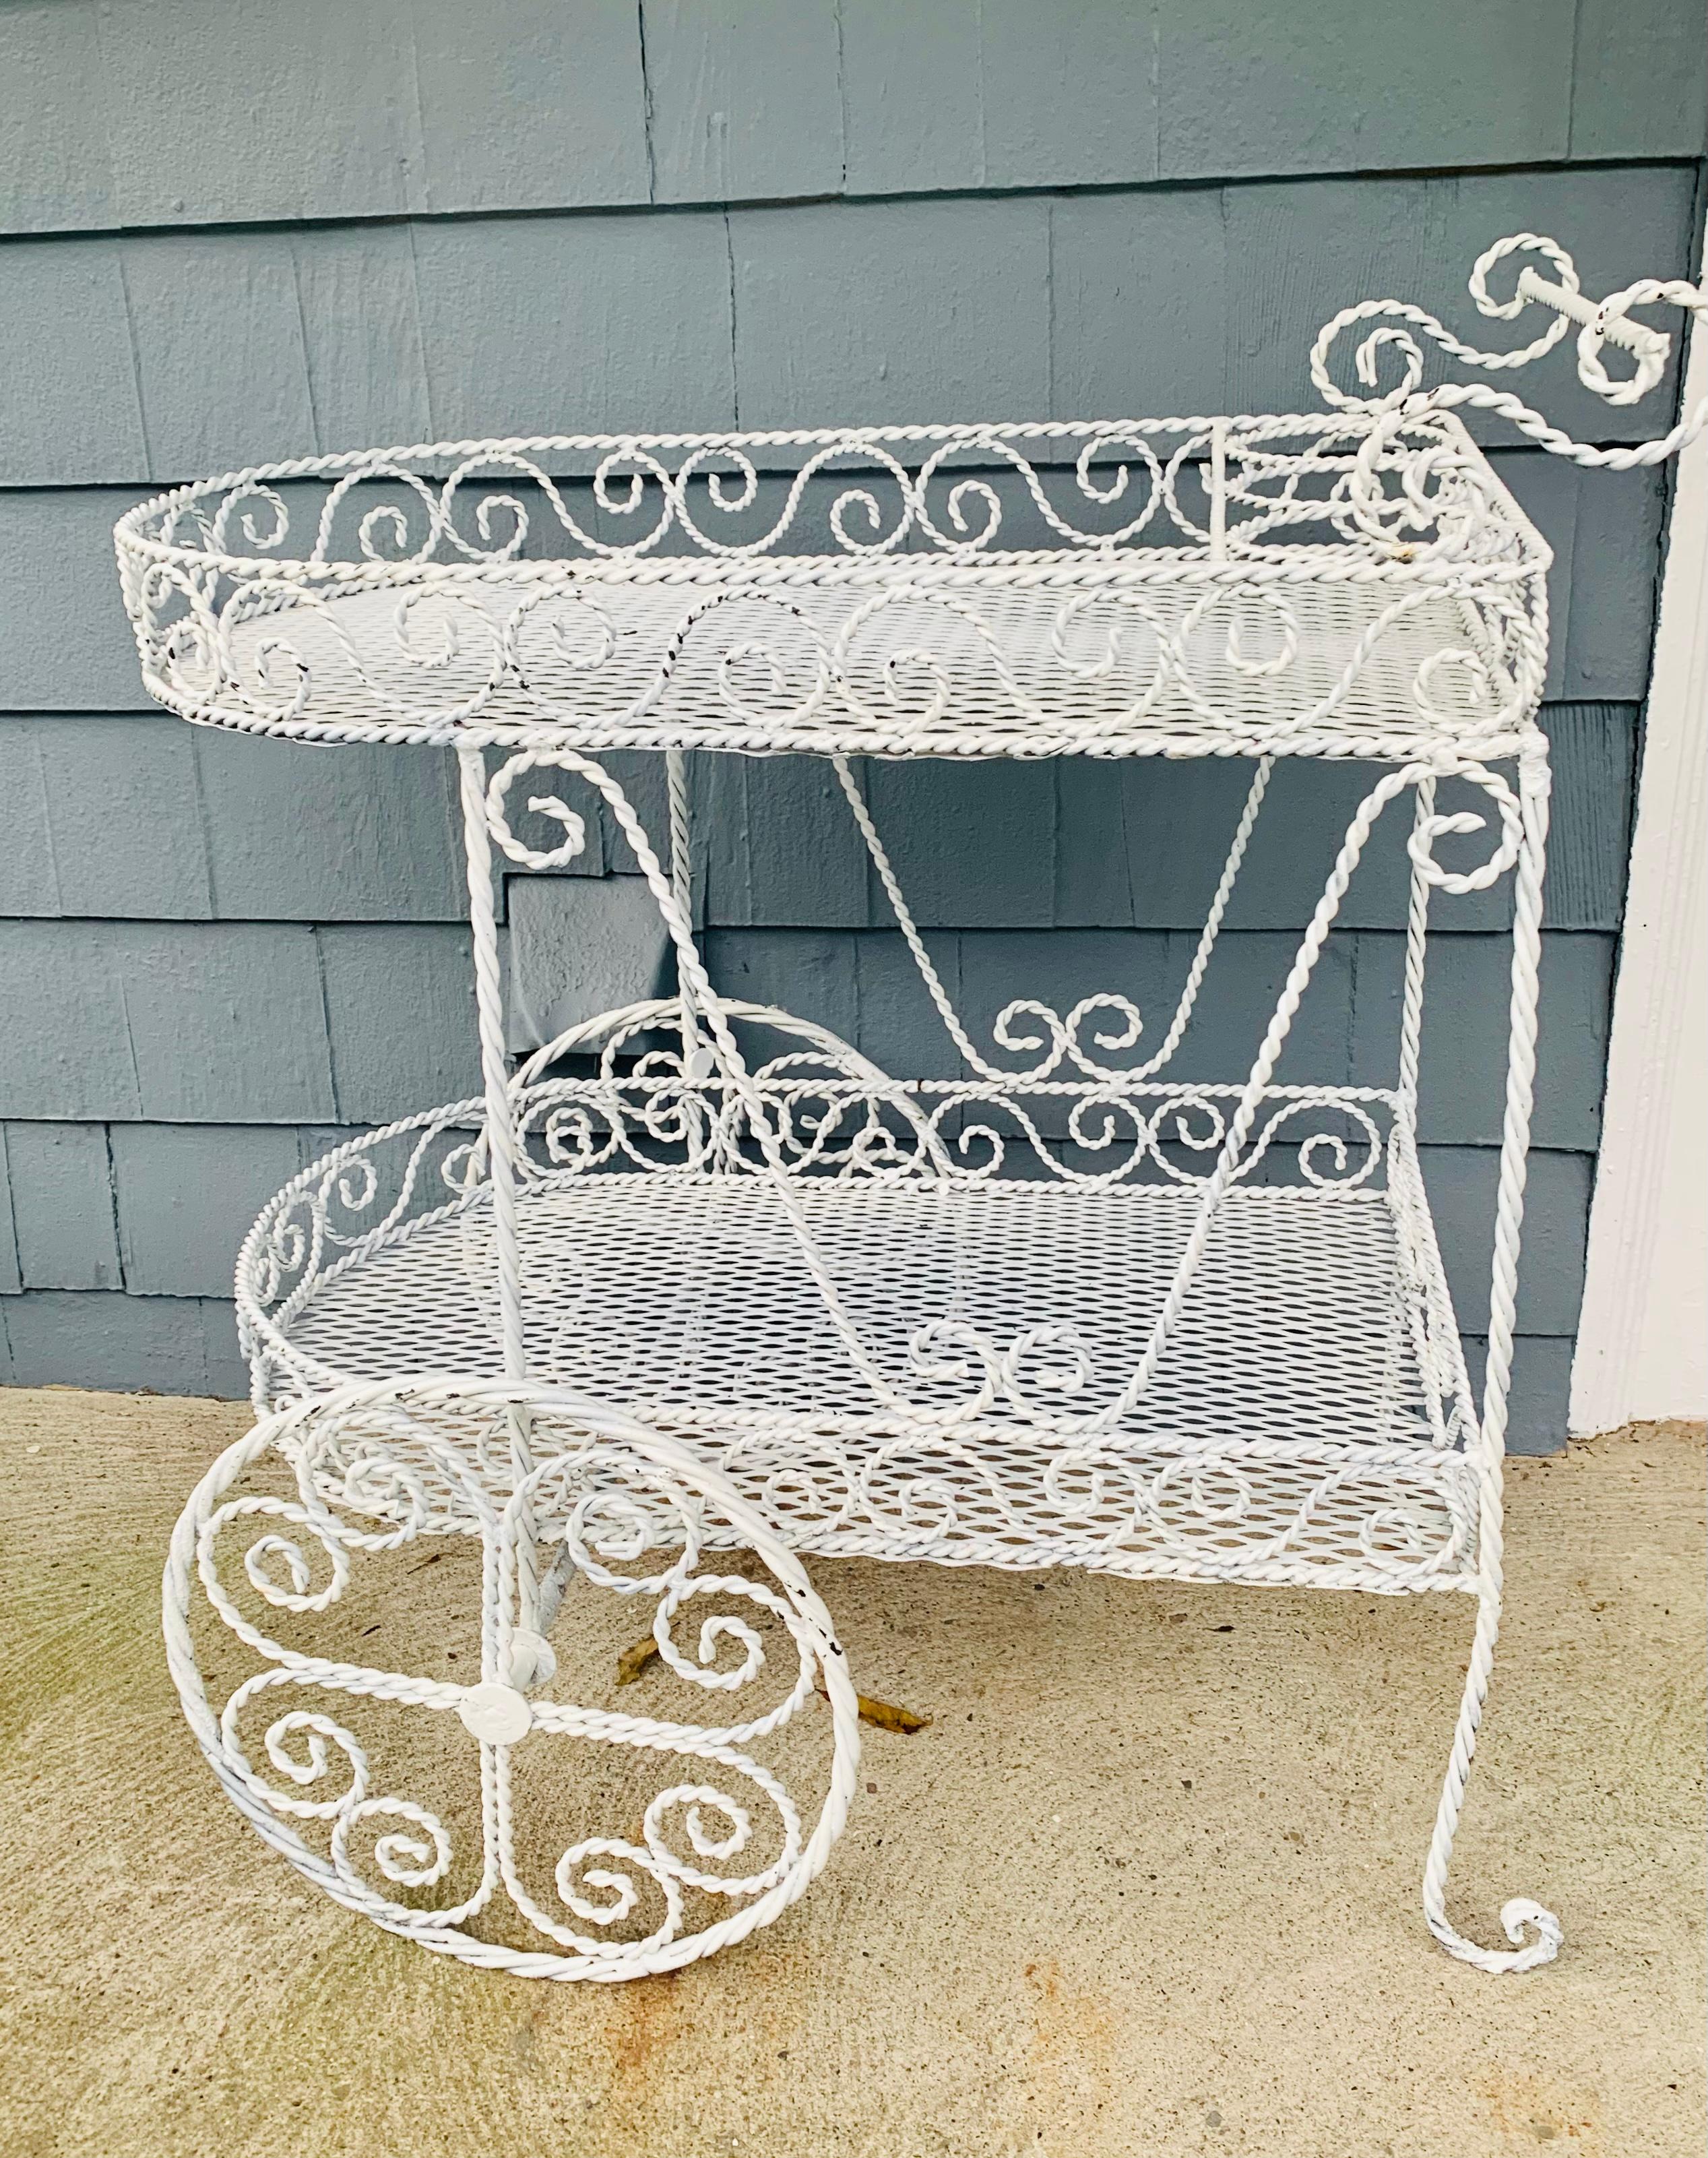 Vintage Salterini bar cart tea trolley

Complimentary Sandblasting and Powdercoating included and will be delivered to your residence in exceptional and restored condition. Protect your investment with SB&PC which adds longevity to the life of